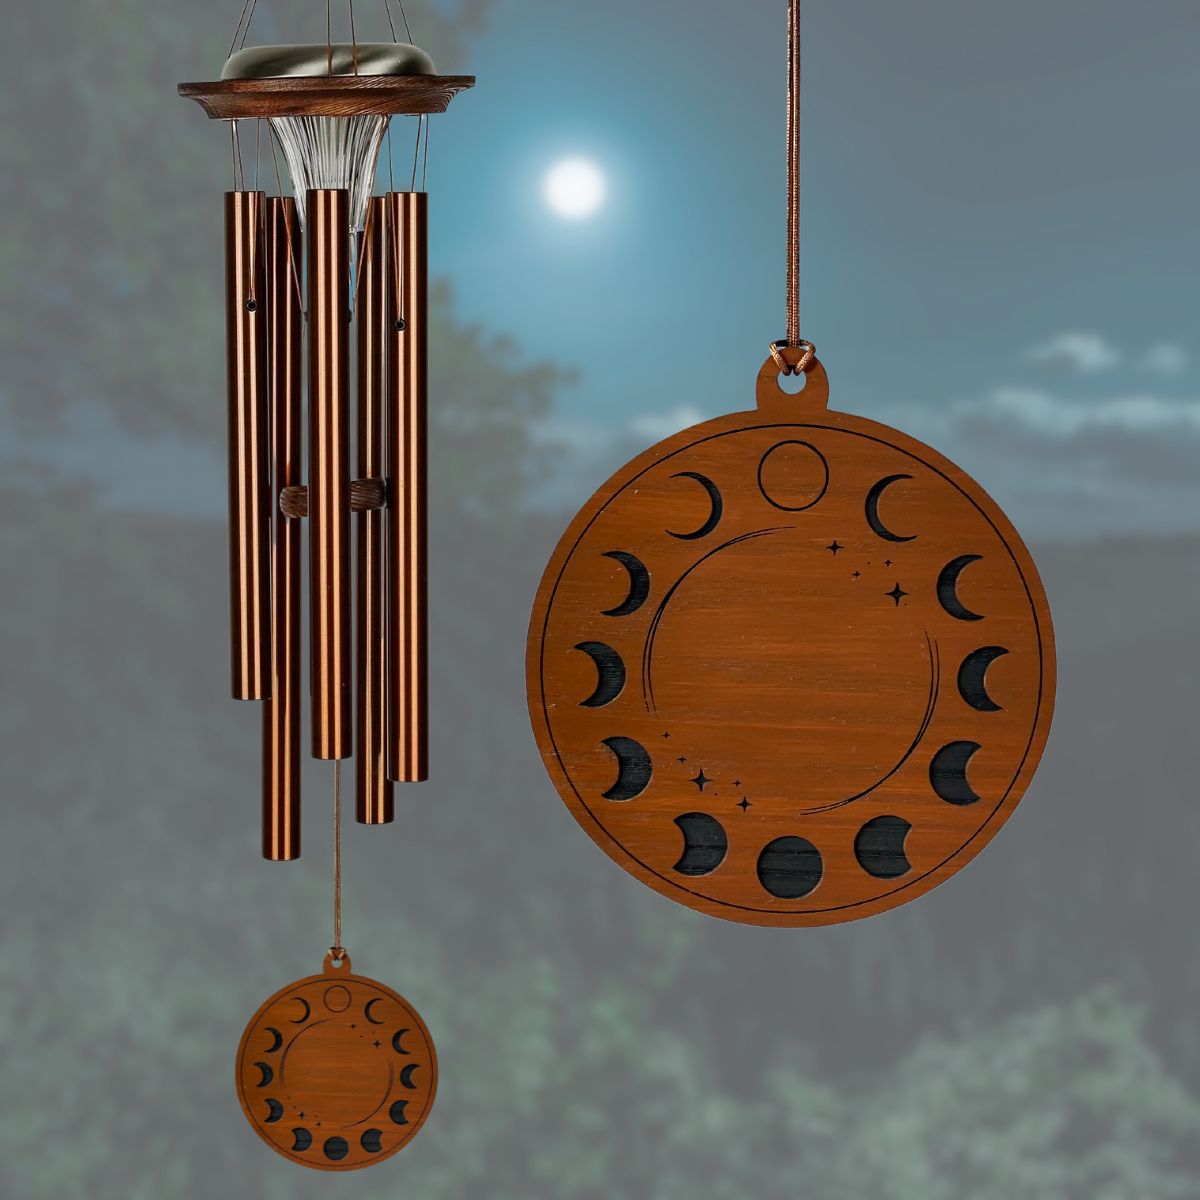 Moonlight Solar Chime 29 Inch Wind Chime - Engravable Moon Phase Sail - Bronze